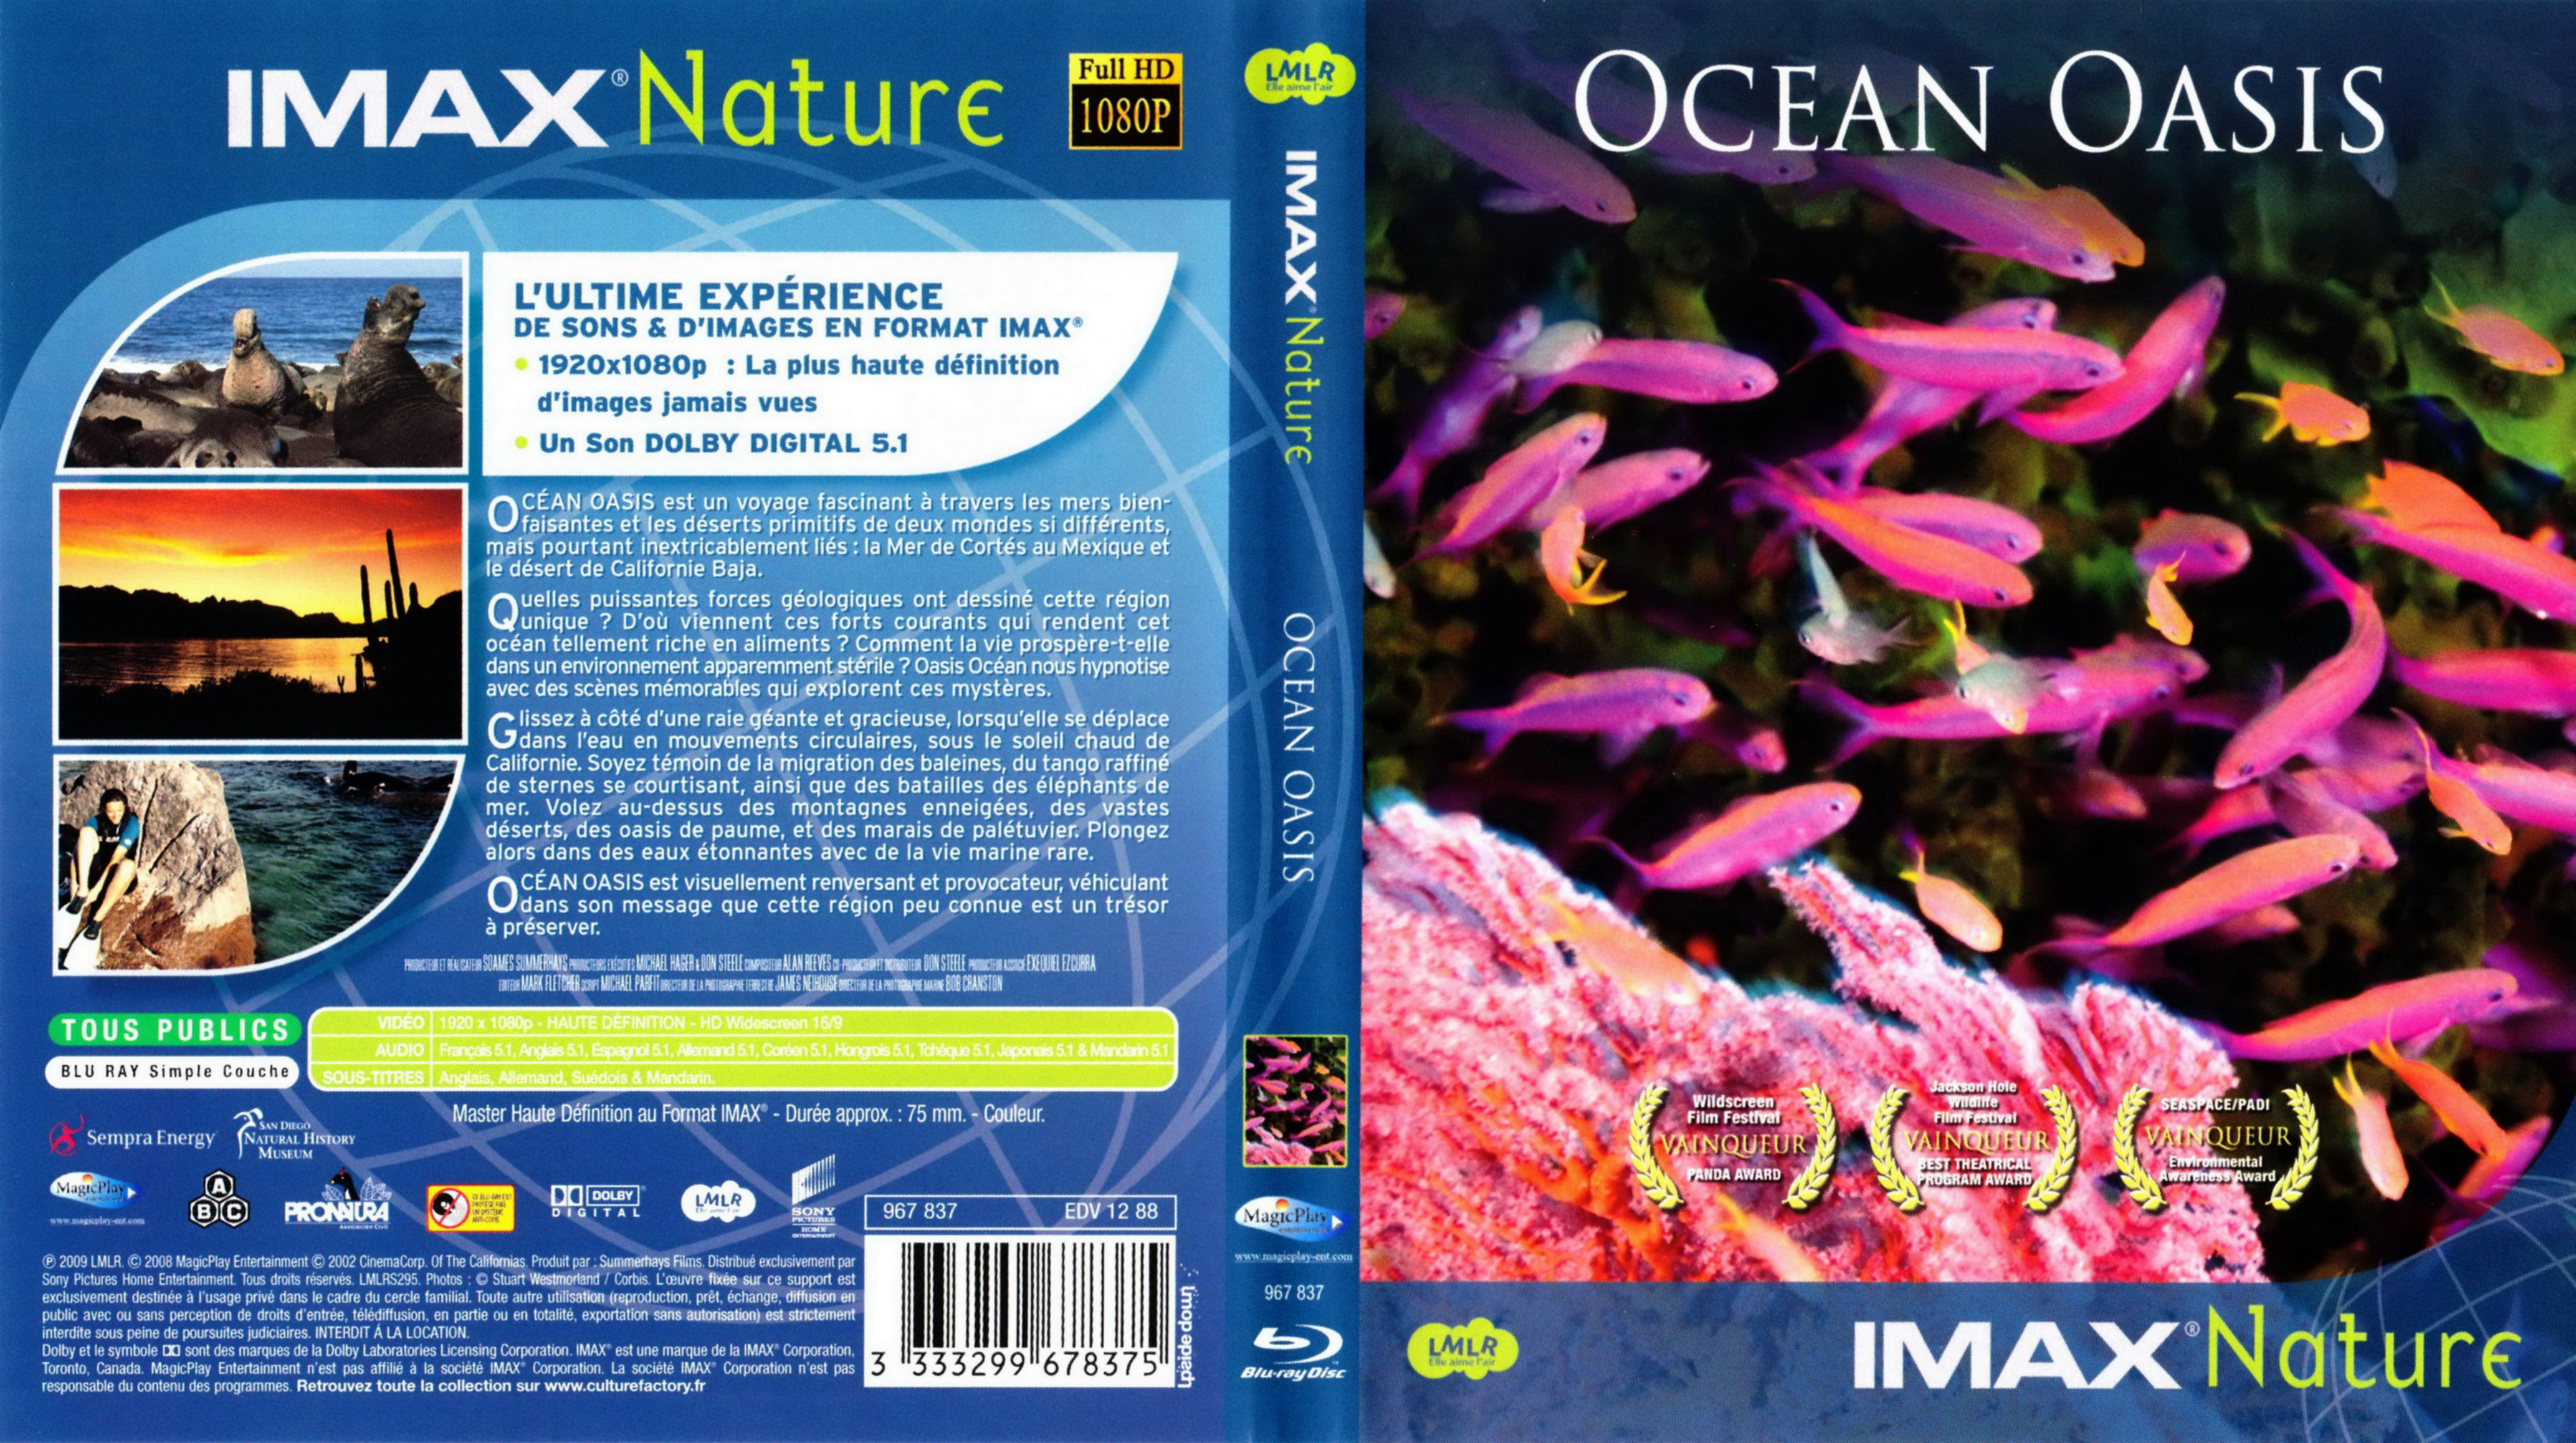 Jaquette DVD Imax nature - Ocean oasis (BLU-RAY)